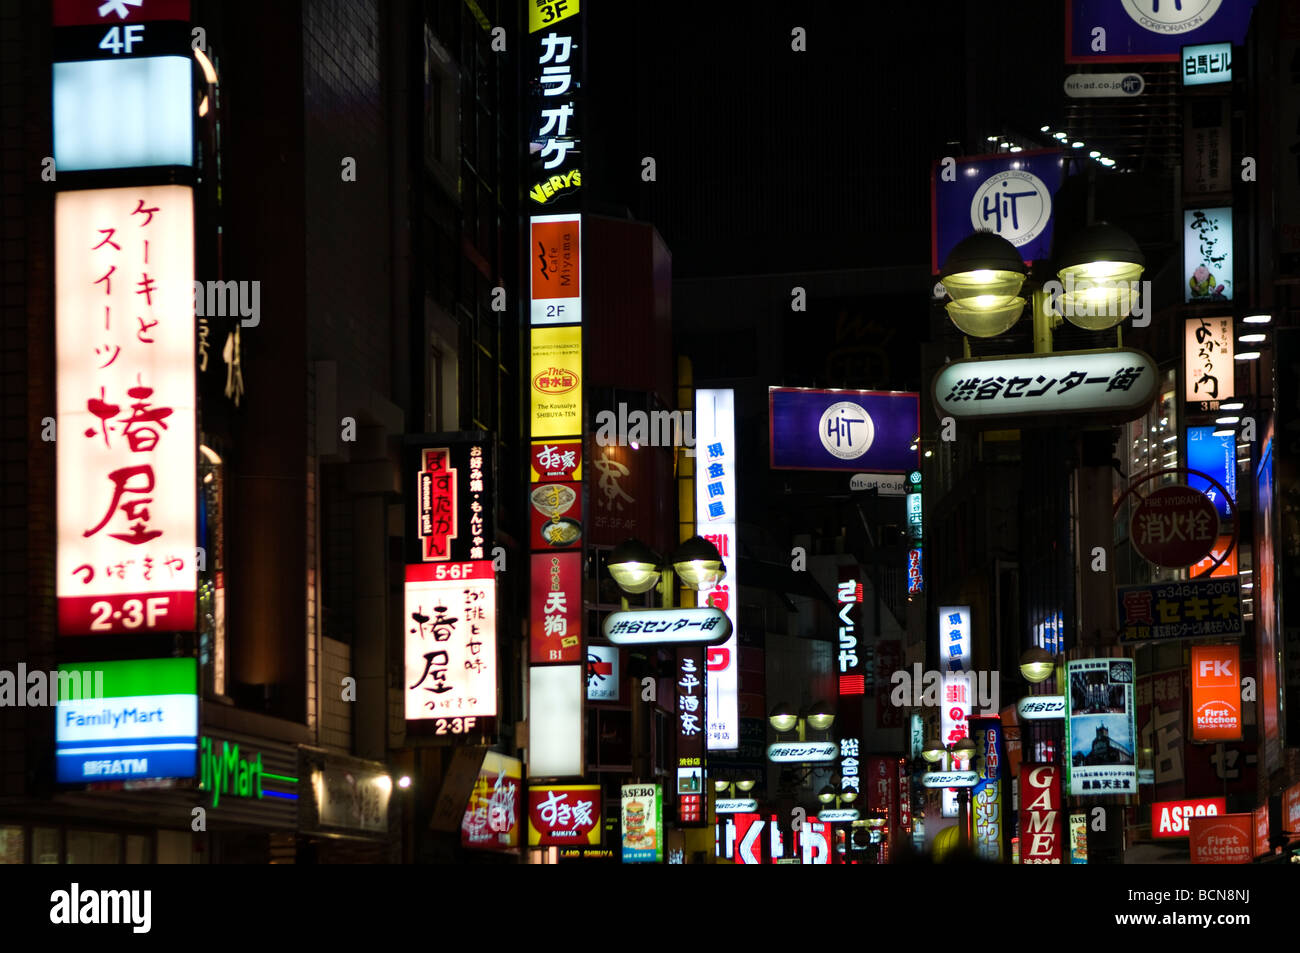 Neon lights and advertisement signs cover building facades in Shibuya district Tokyo Japan Stock Photo